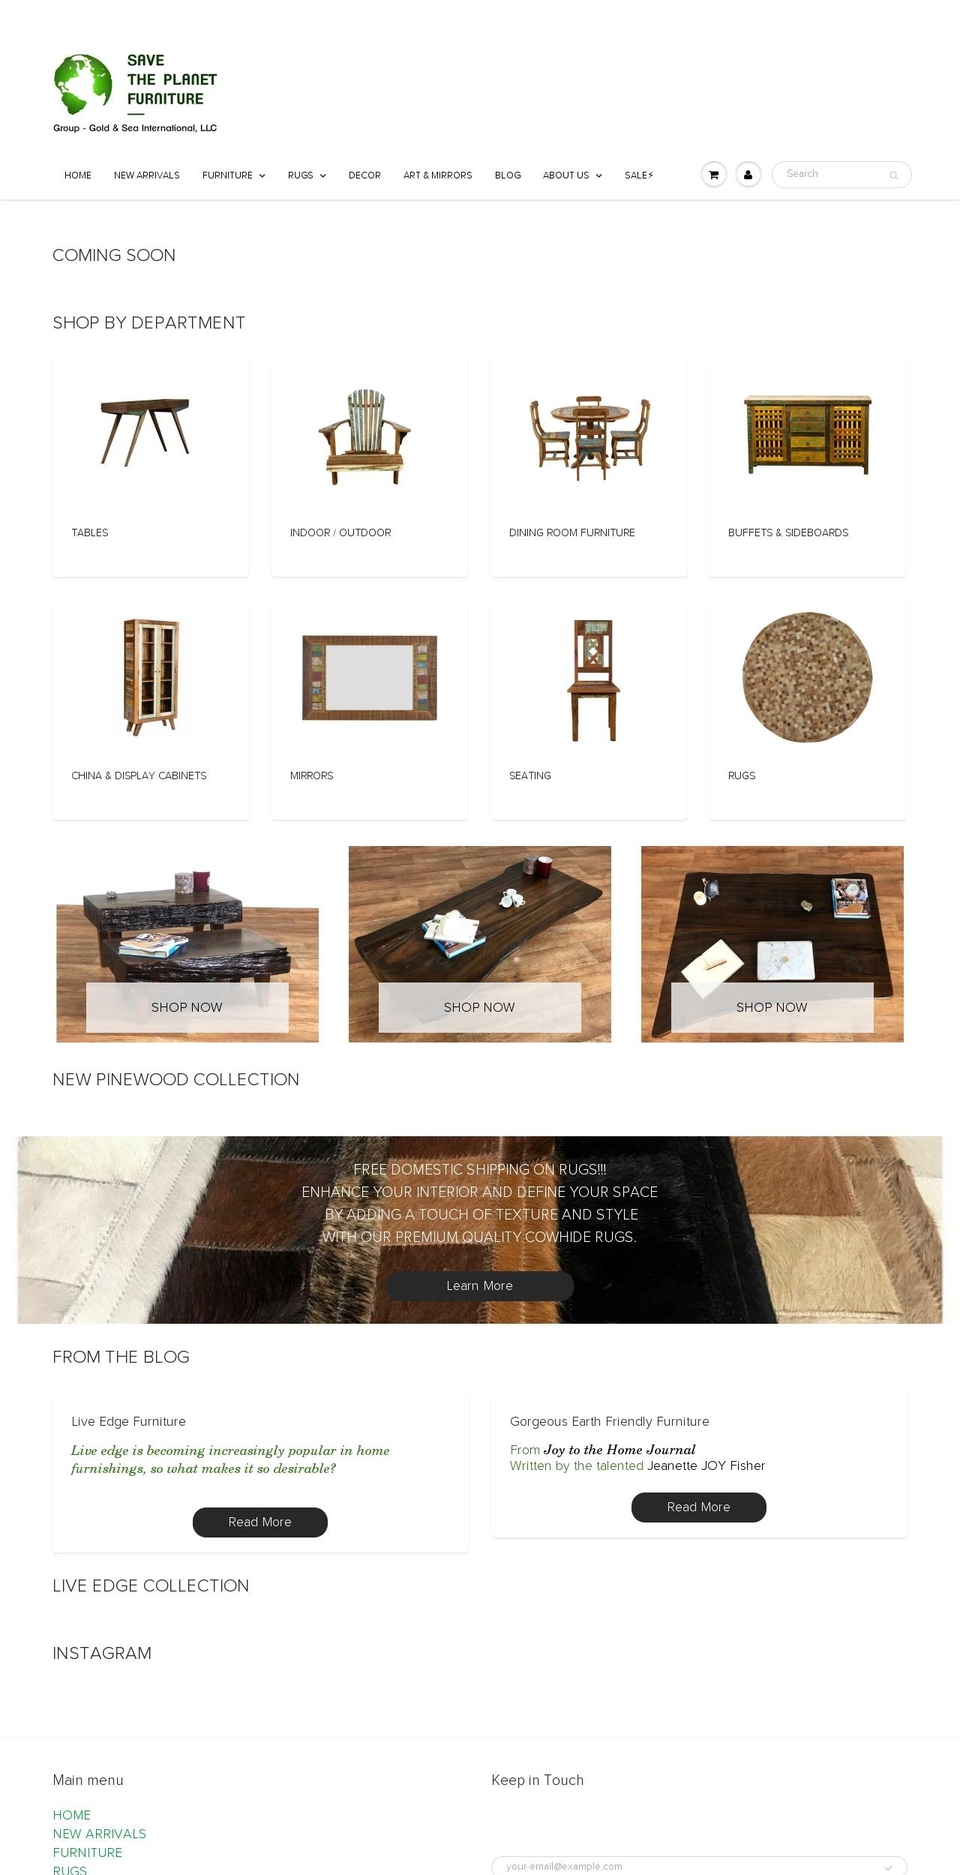 install-me-yourstore-v2-1-7 Shopify theme site example savetheplanetfurniture.com